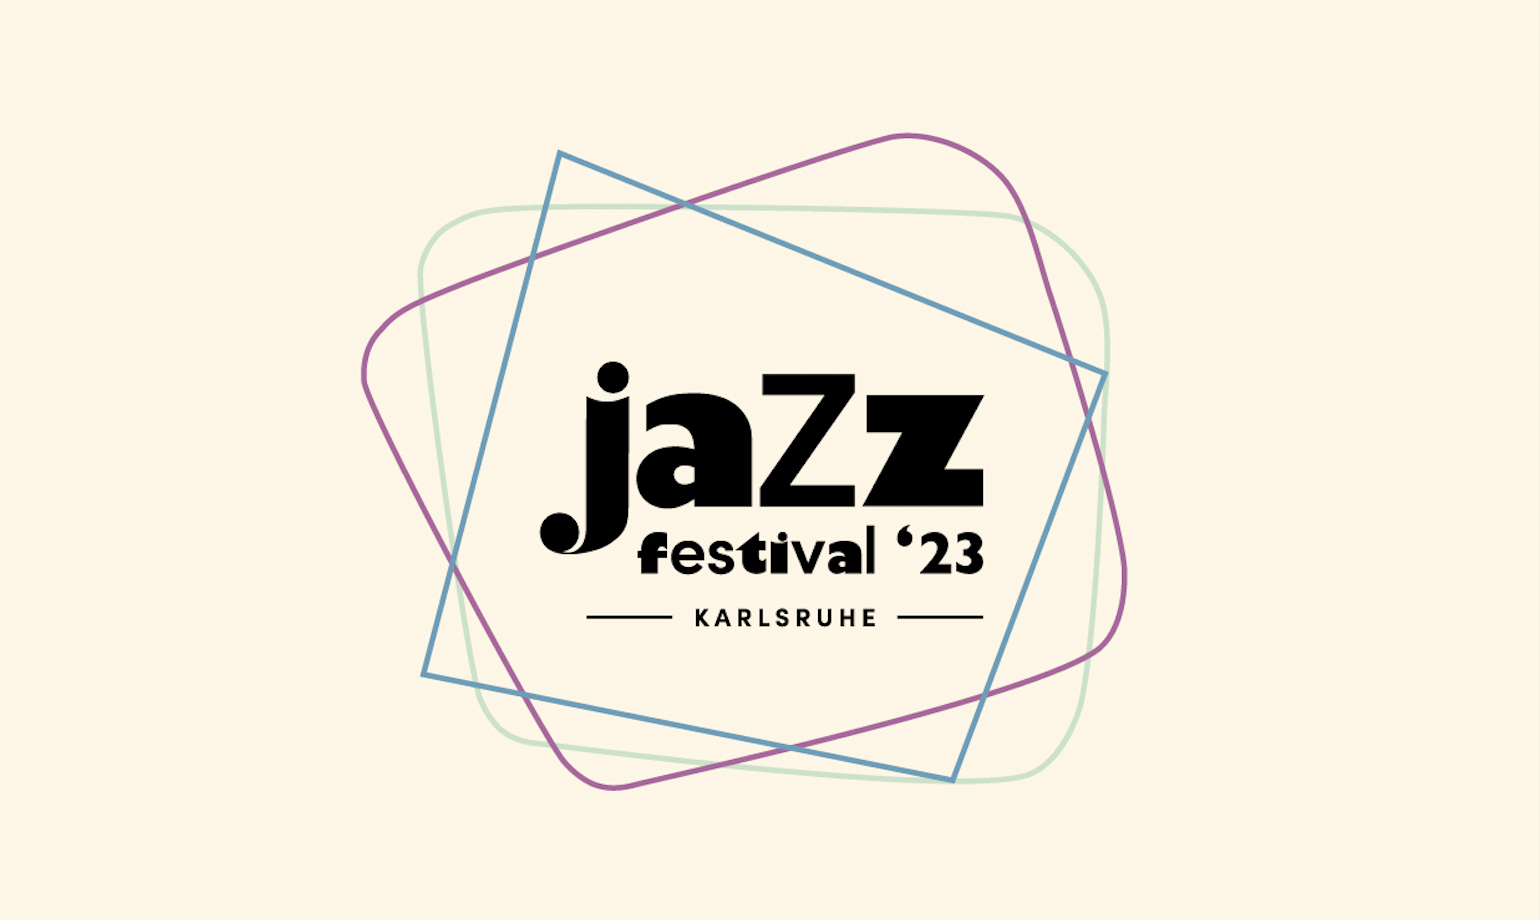 Three colorful frames on an almond brown background, in the middle of which is written in jagged letters »jazz festival '23 Karlsruhe«.